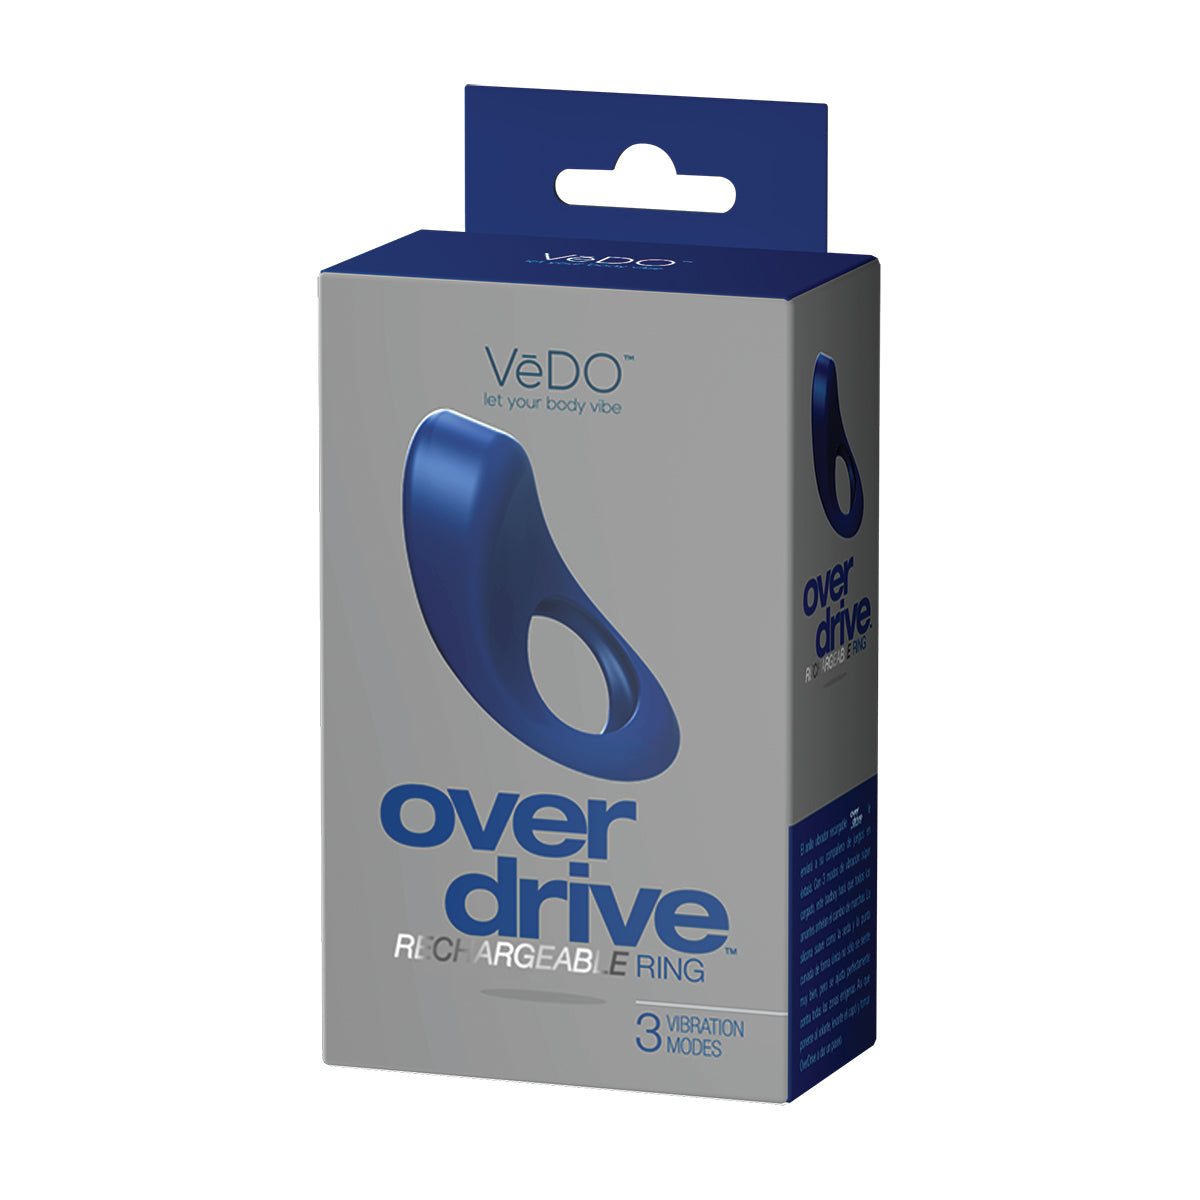 VeDO Overdrive Rechargeable Vibrating Ring